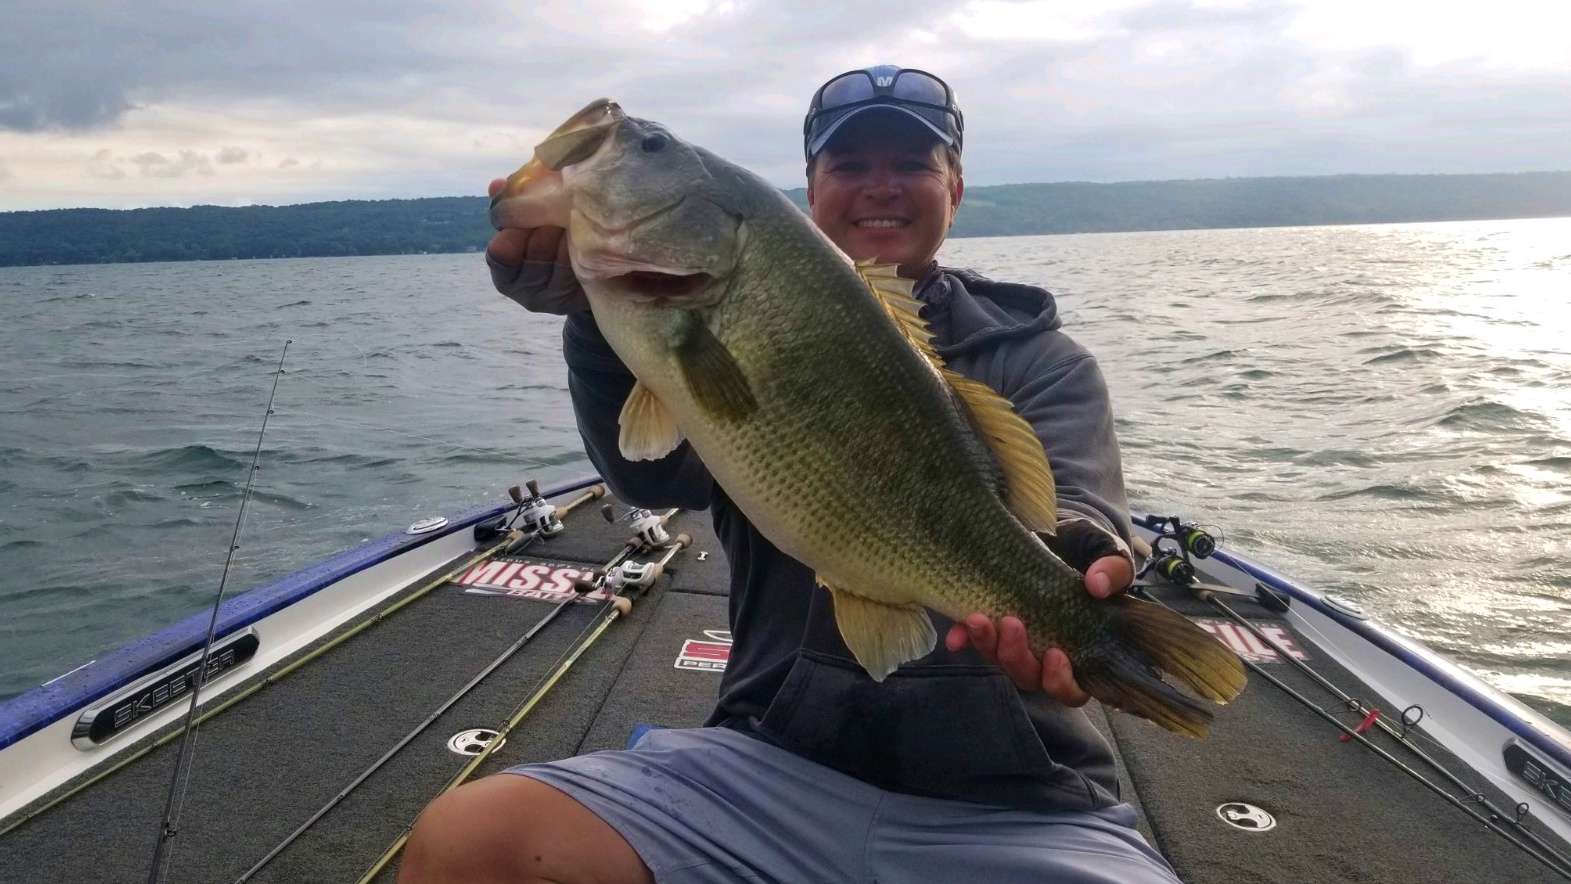 Derek Hudnall with an ABSOLUTE GIANT Largemouth ! 7 plus pounder. What a way the start the tournament.  